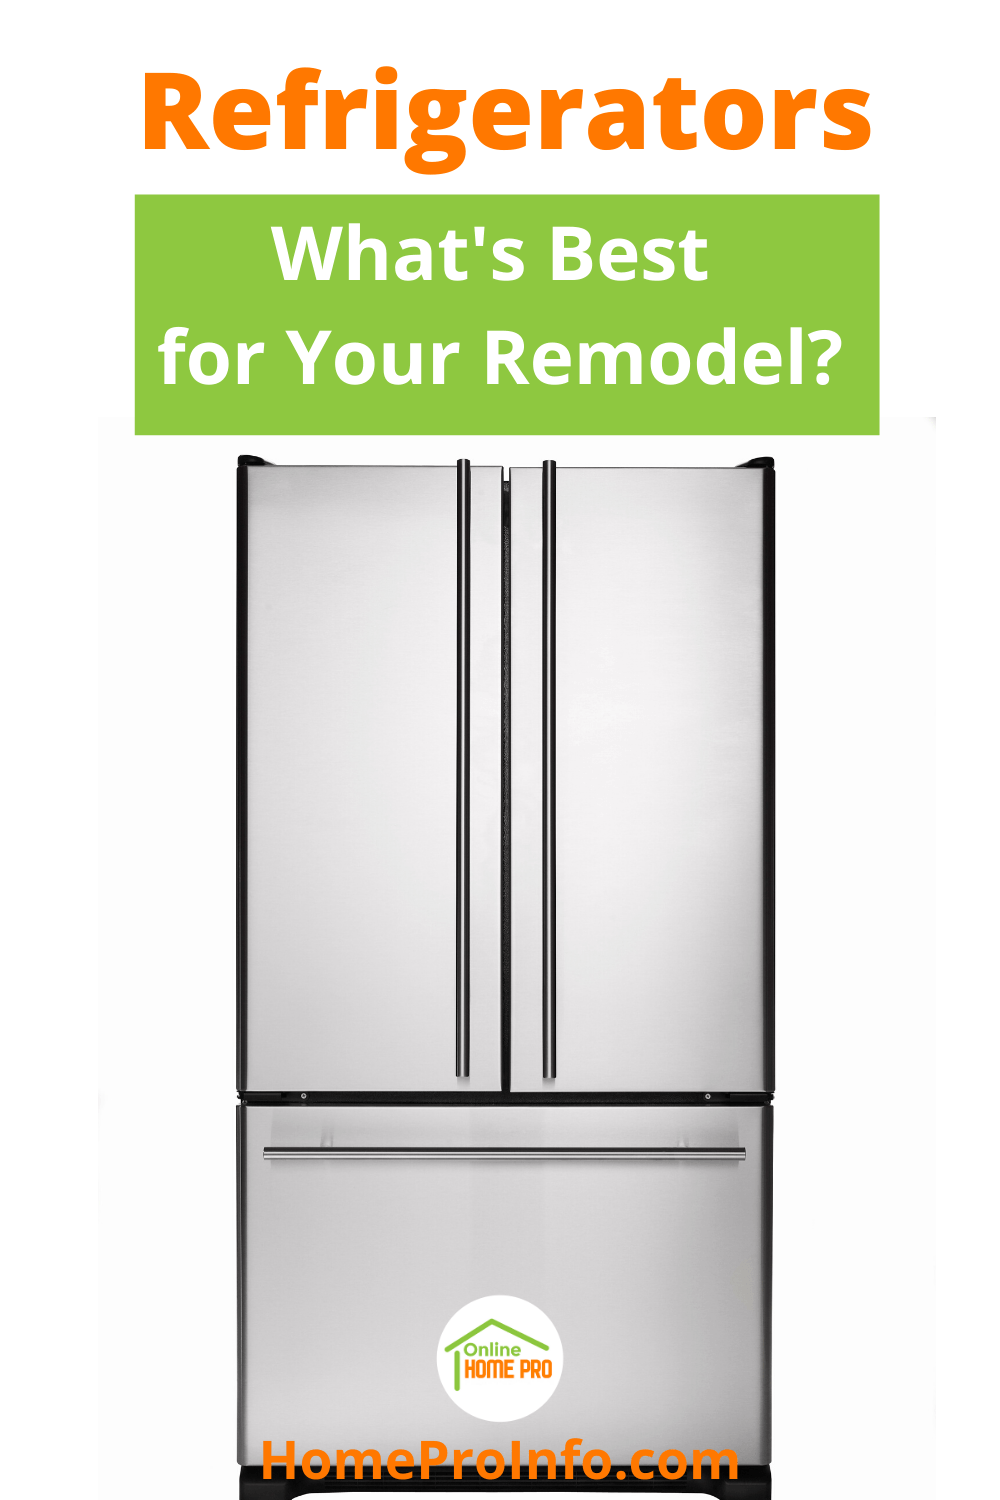 refrigerators and remodeling